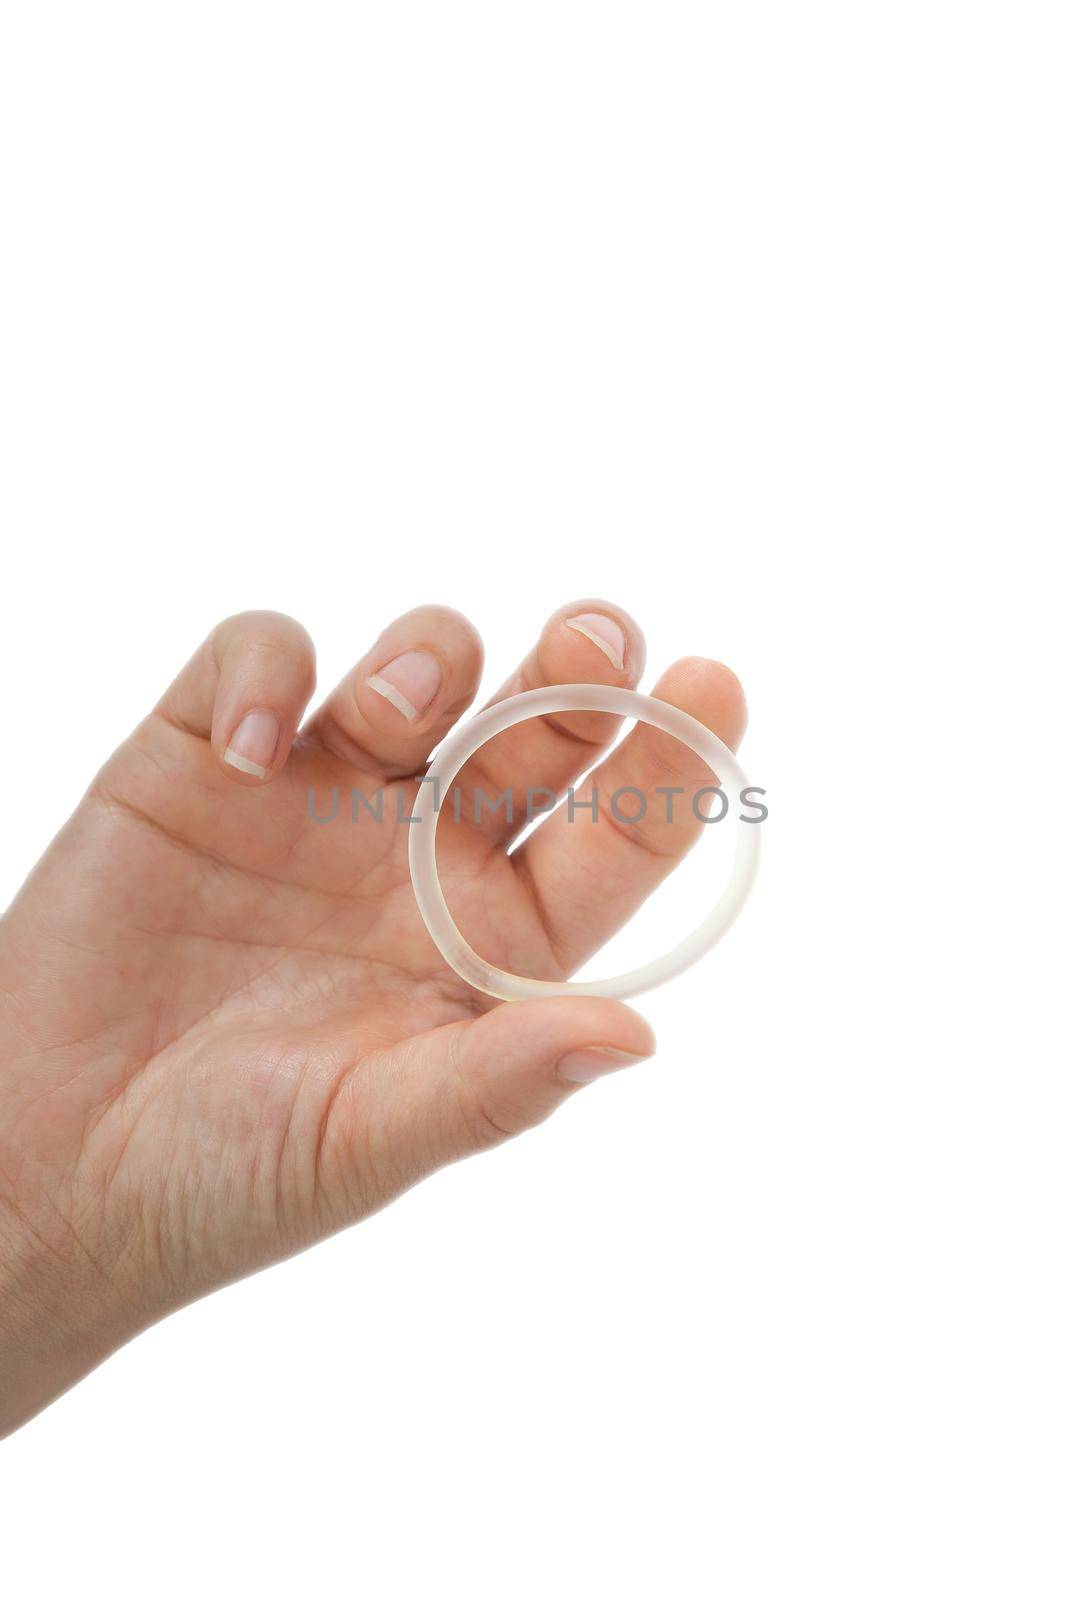 Birth control ,hormone, contraception ring in a womans hand isolated on white background, vaginal ring for contraceptive use with copy space closeup